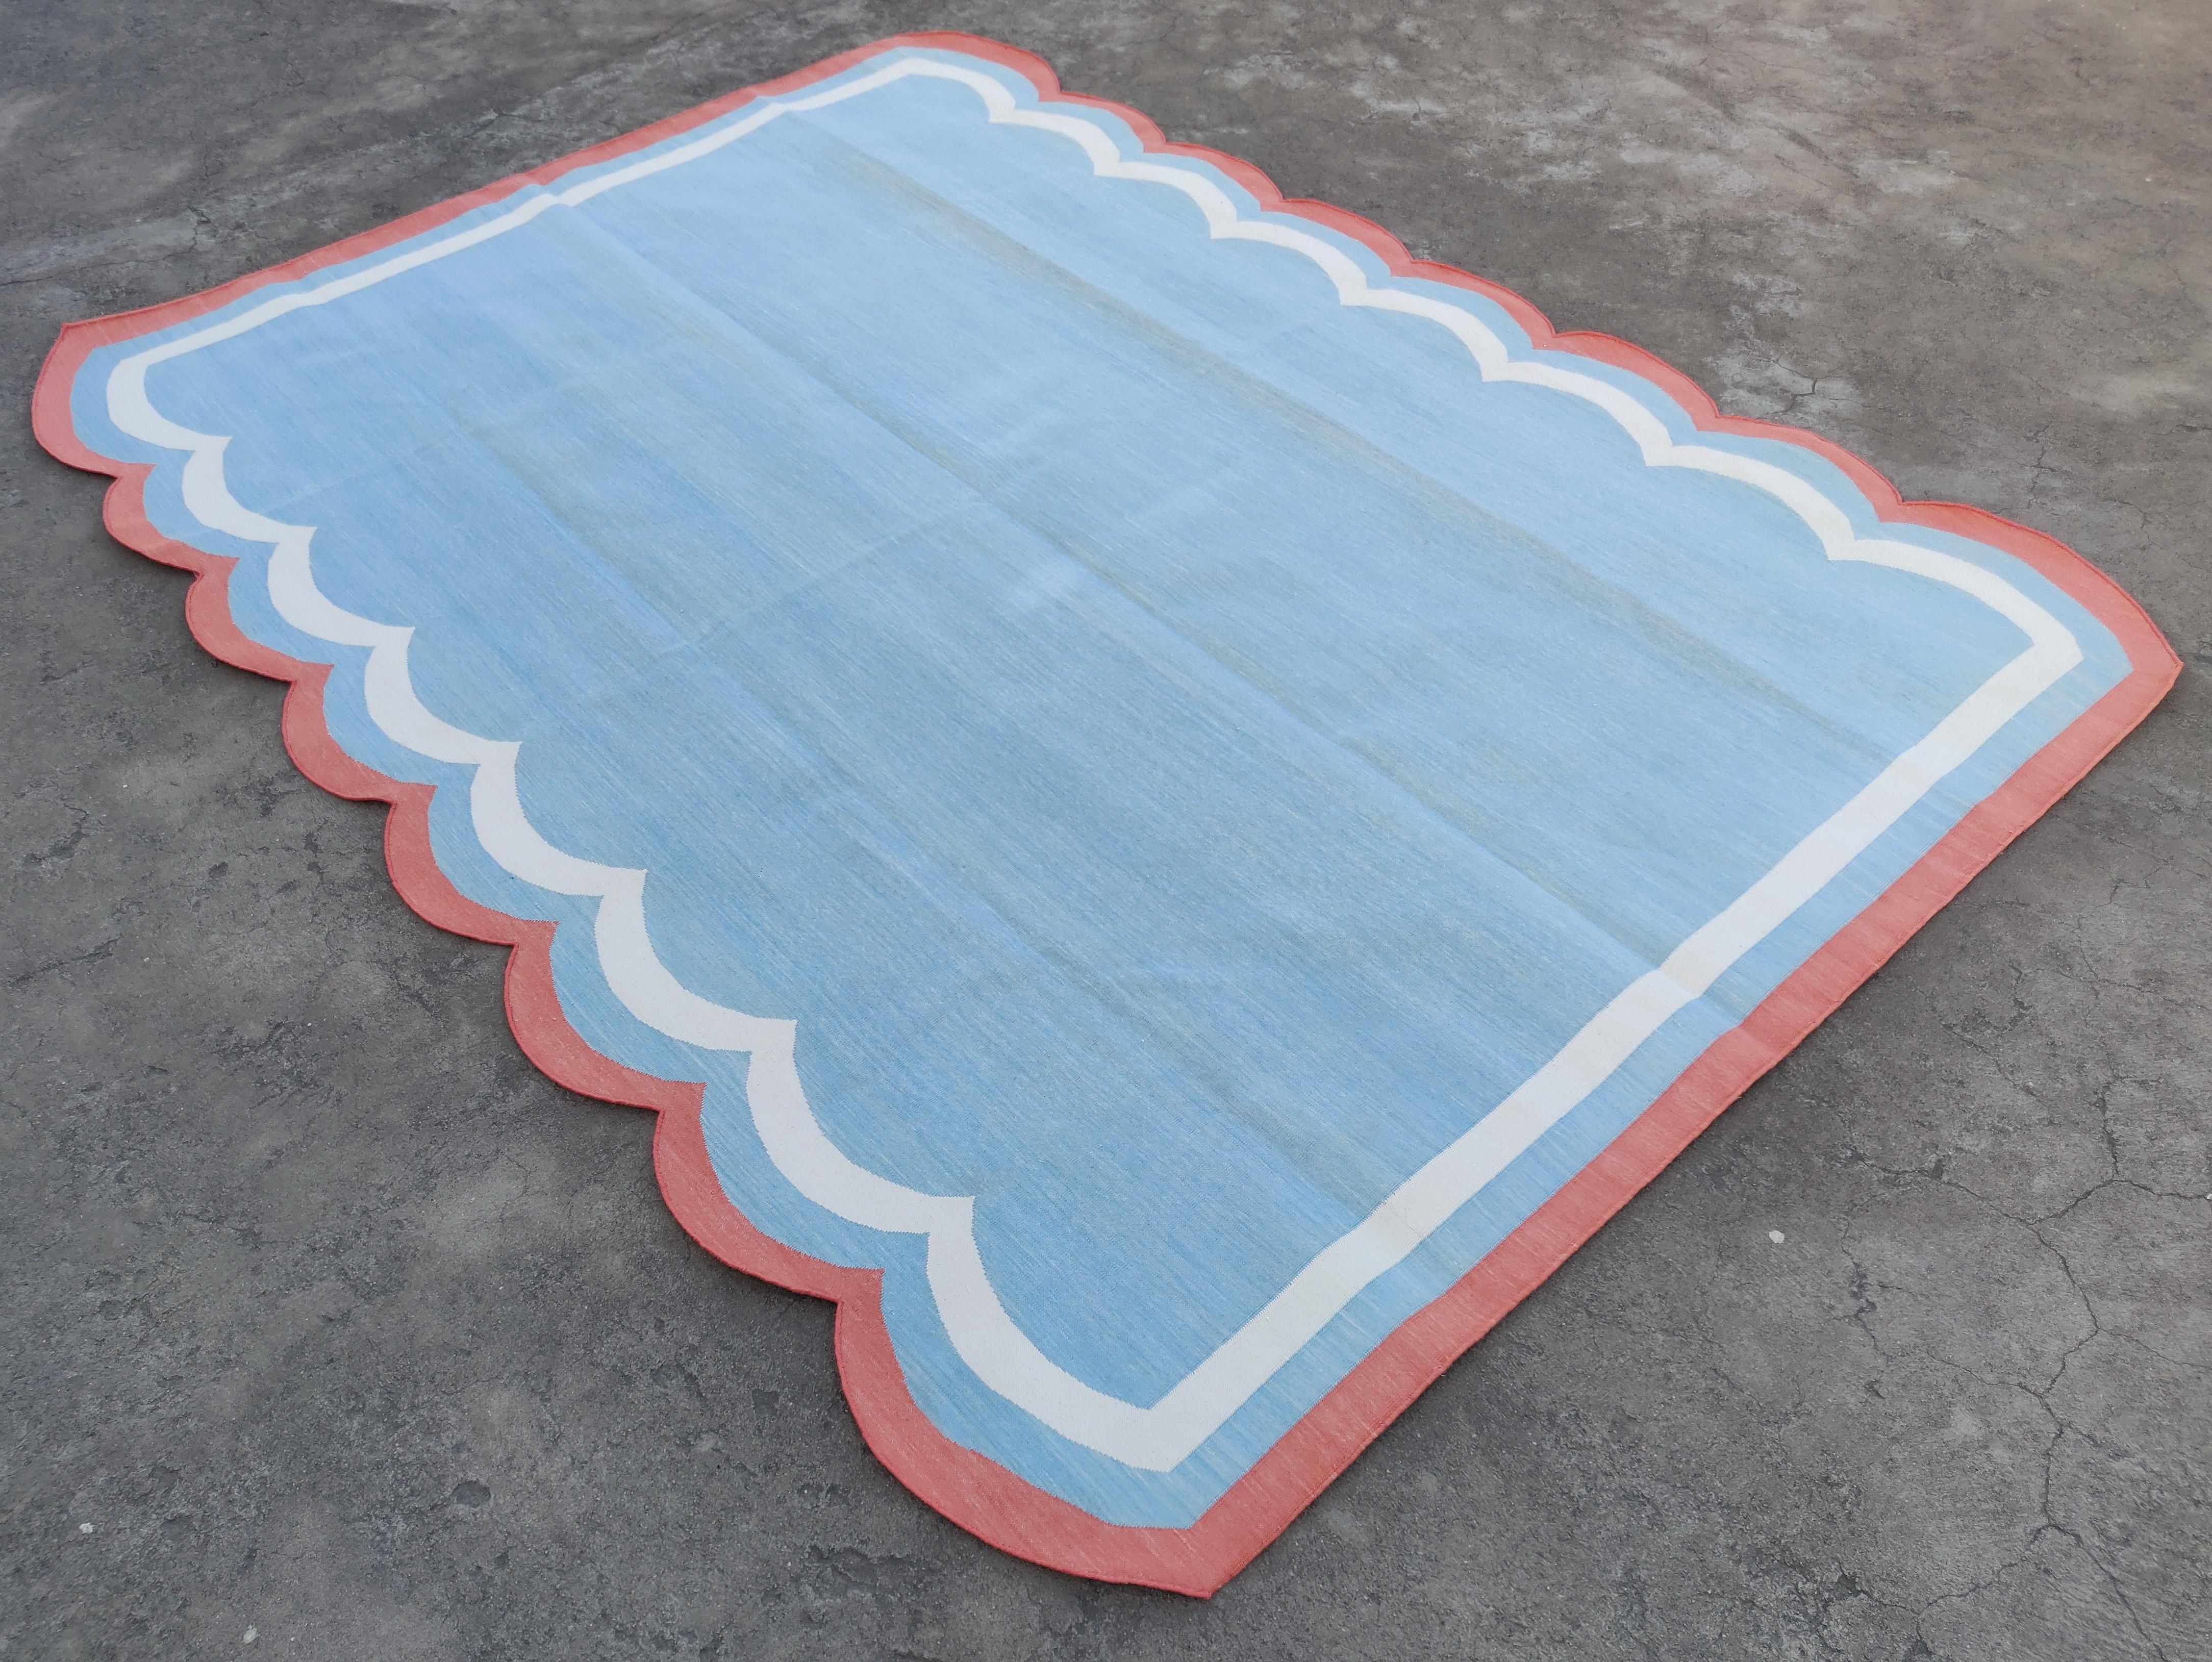 Cotton Vegetable Dyed Sky Blue and Coral Four Sided Scalloped Striped Indian Dhurrie Rug-6'x8' 

These special flat-weave dhurries are hand-woven with 15 ply 100% cotton yarn. Due to the special manufacturing techniques used to create our rugs, the